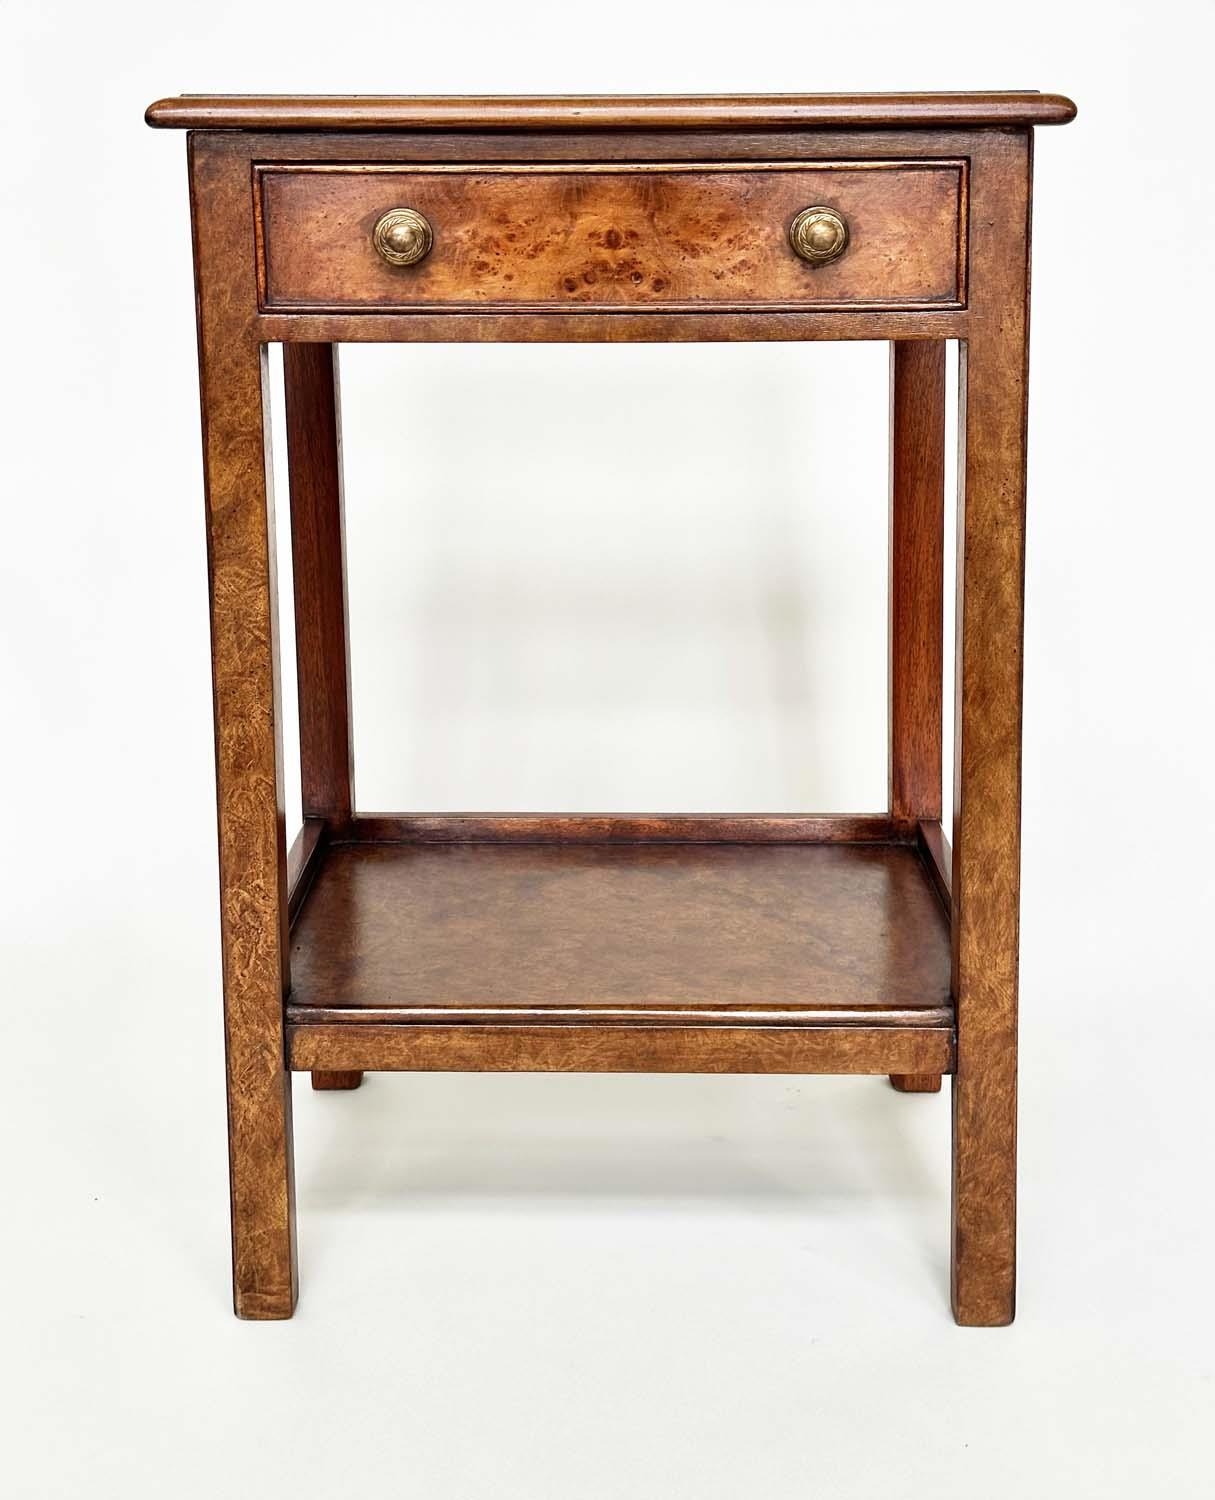 LAMP TABLES, a pair, George III design burr walnut and crossbanded each with drawer and undertier, - Image 5 of 9